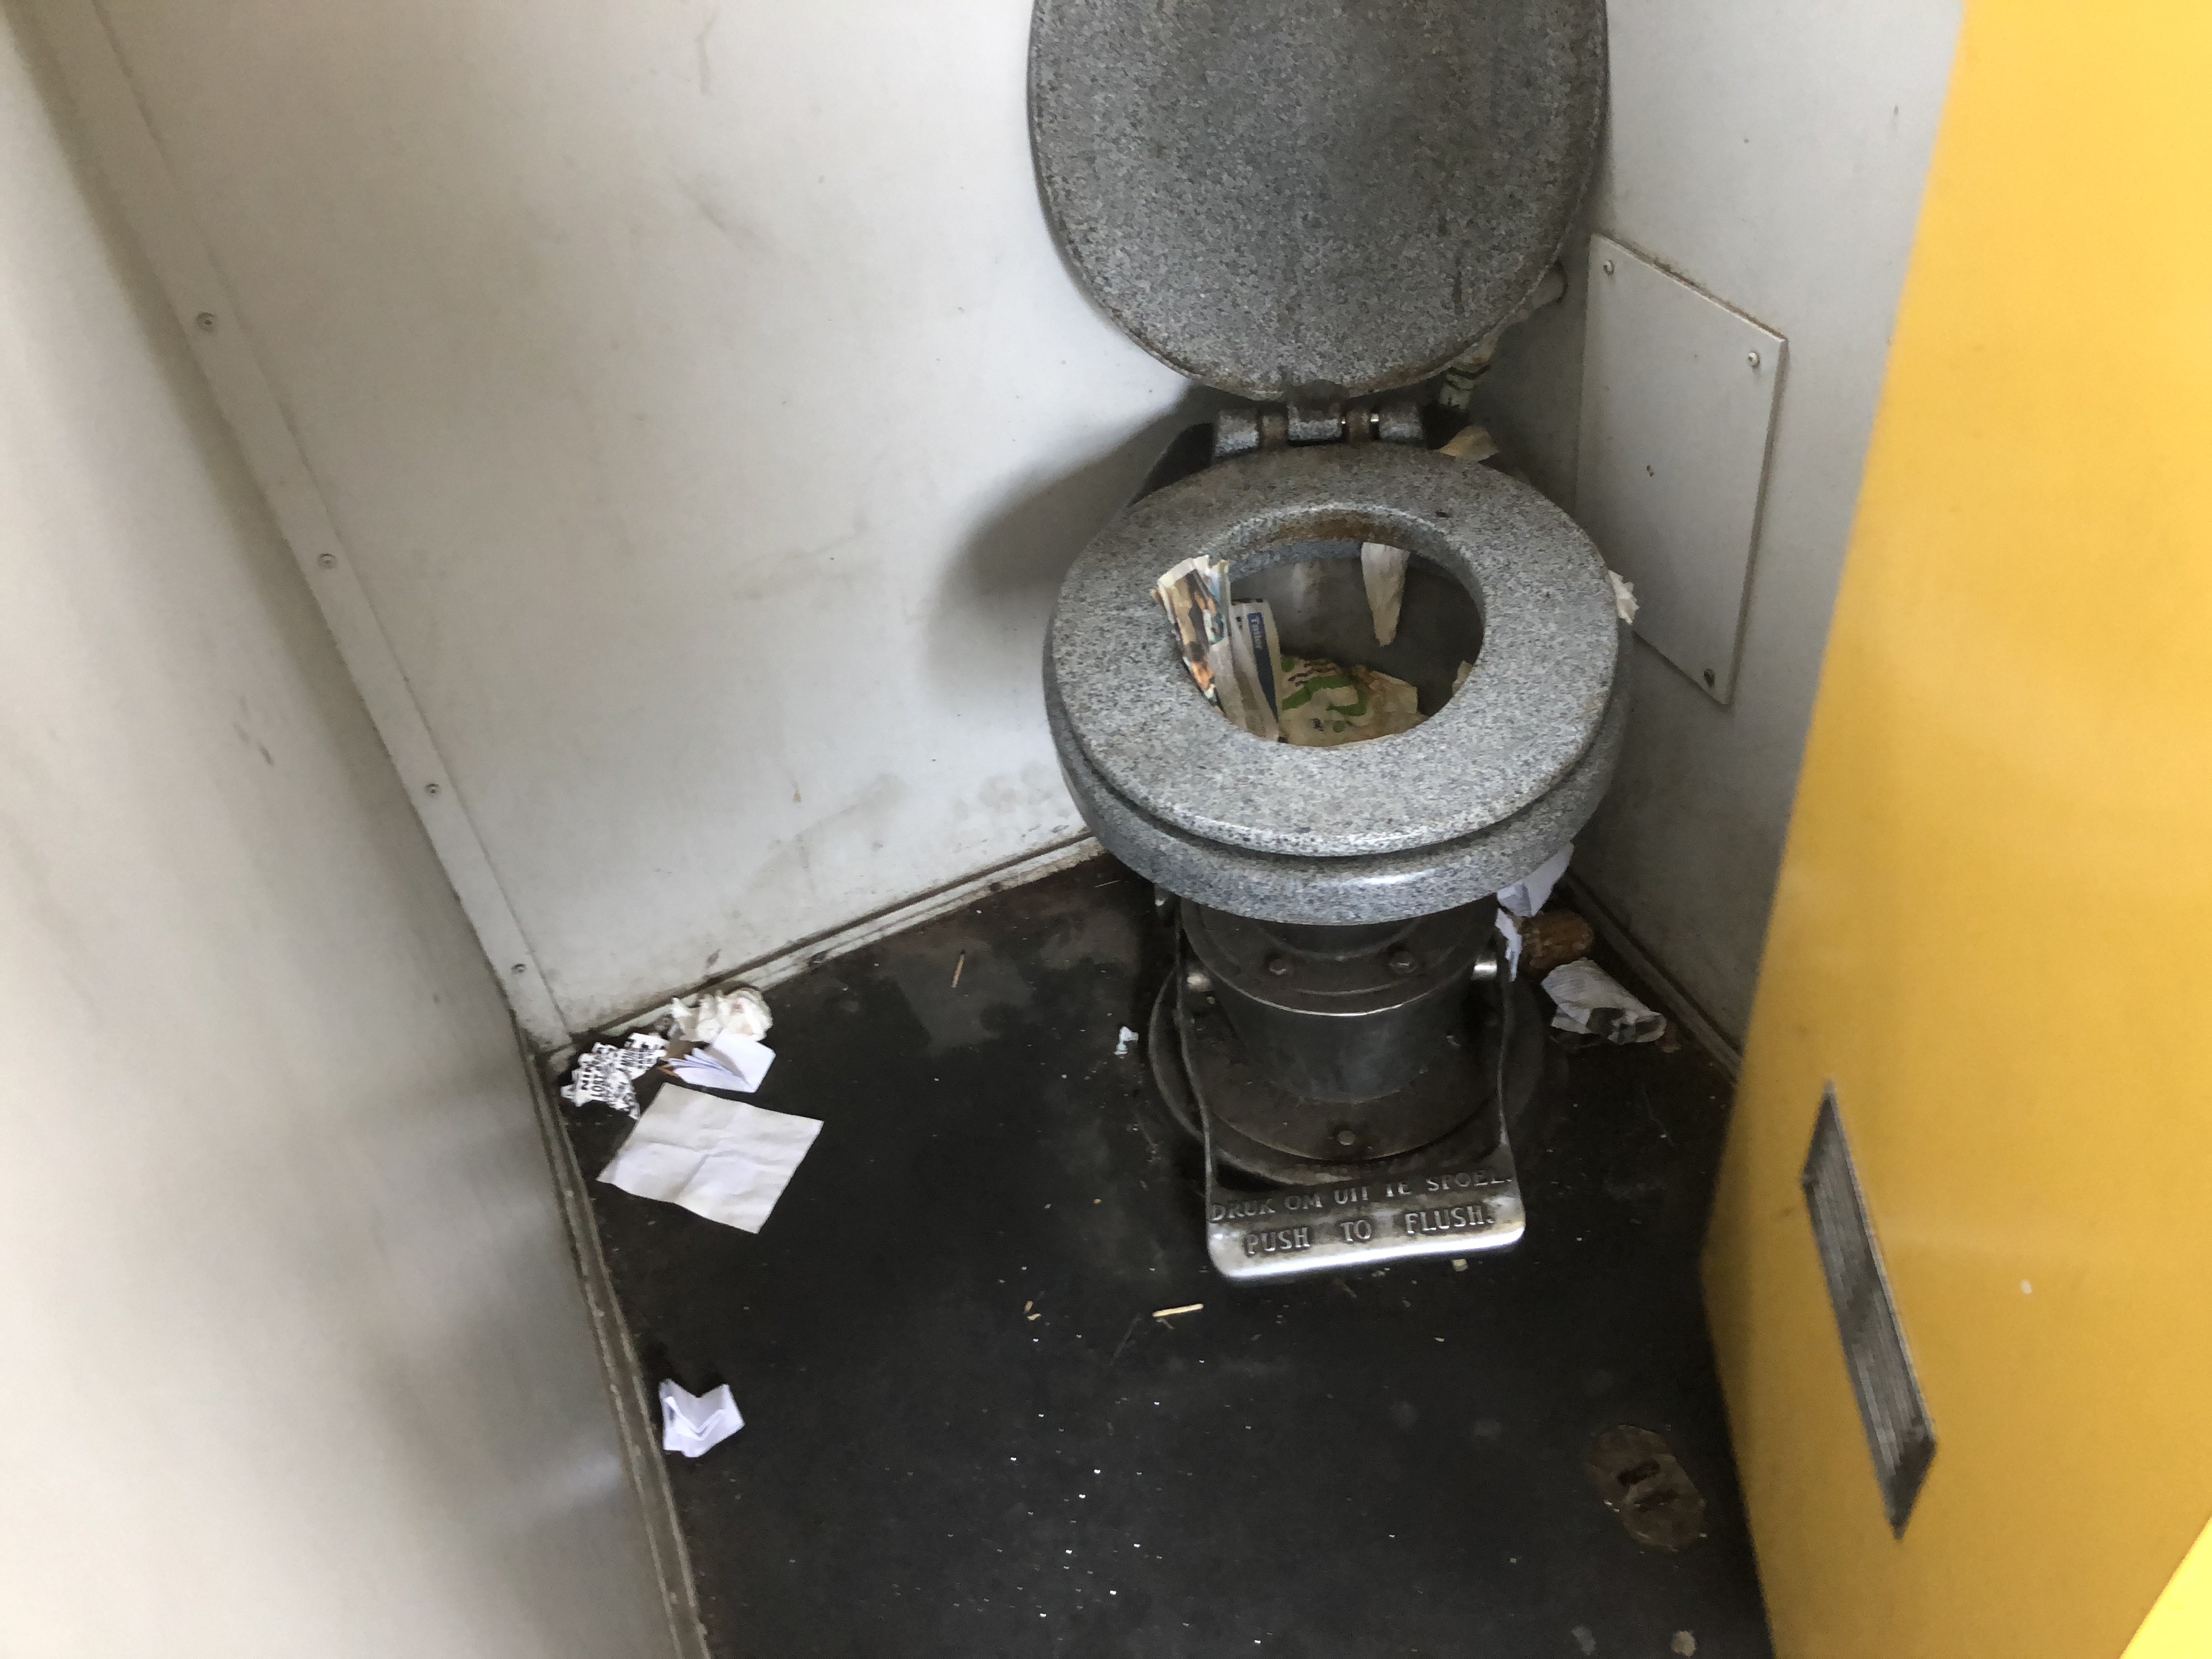 Photo of a filthy toilet